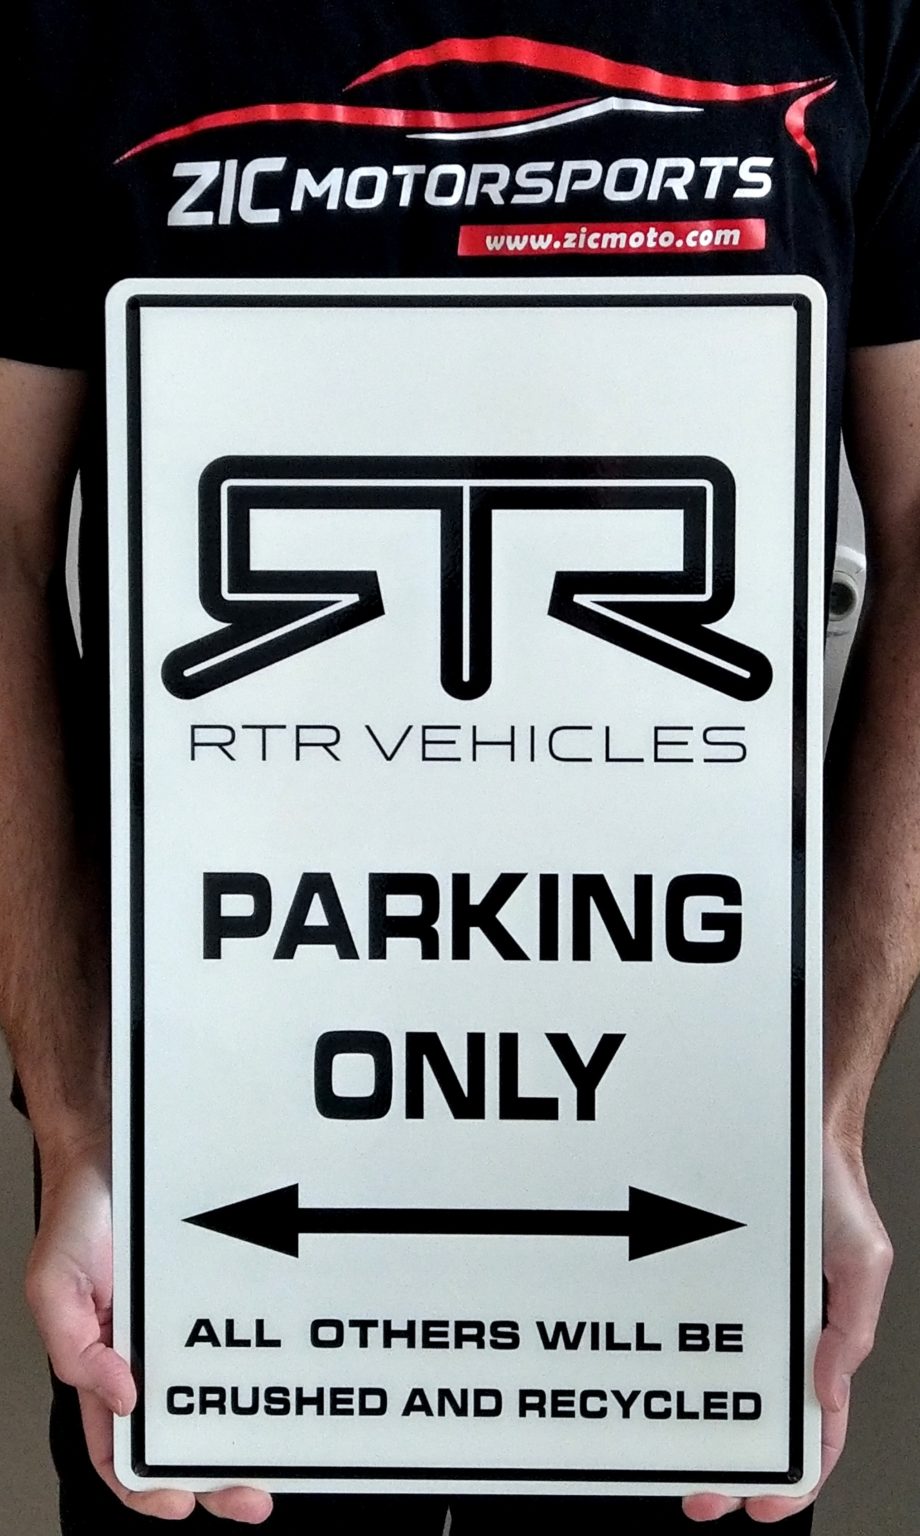 RTR Vehicle Parking Only Steel Sign - 20" X 12"